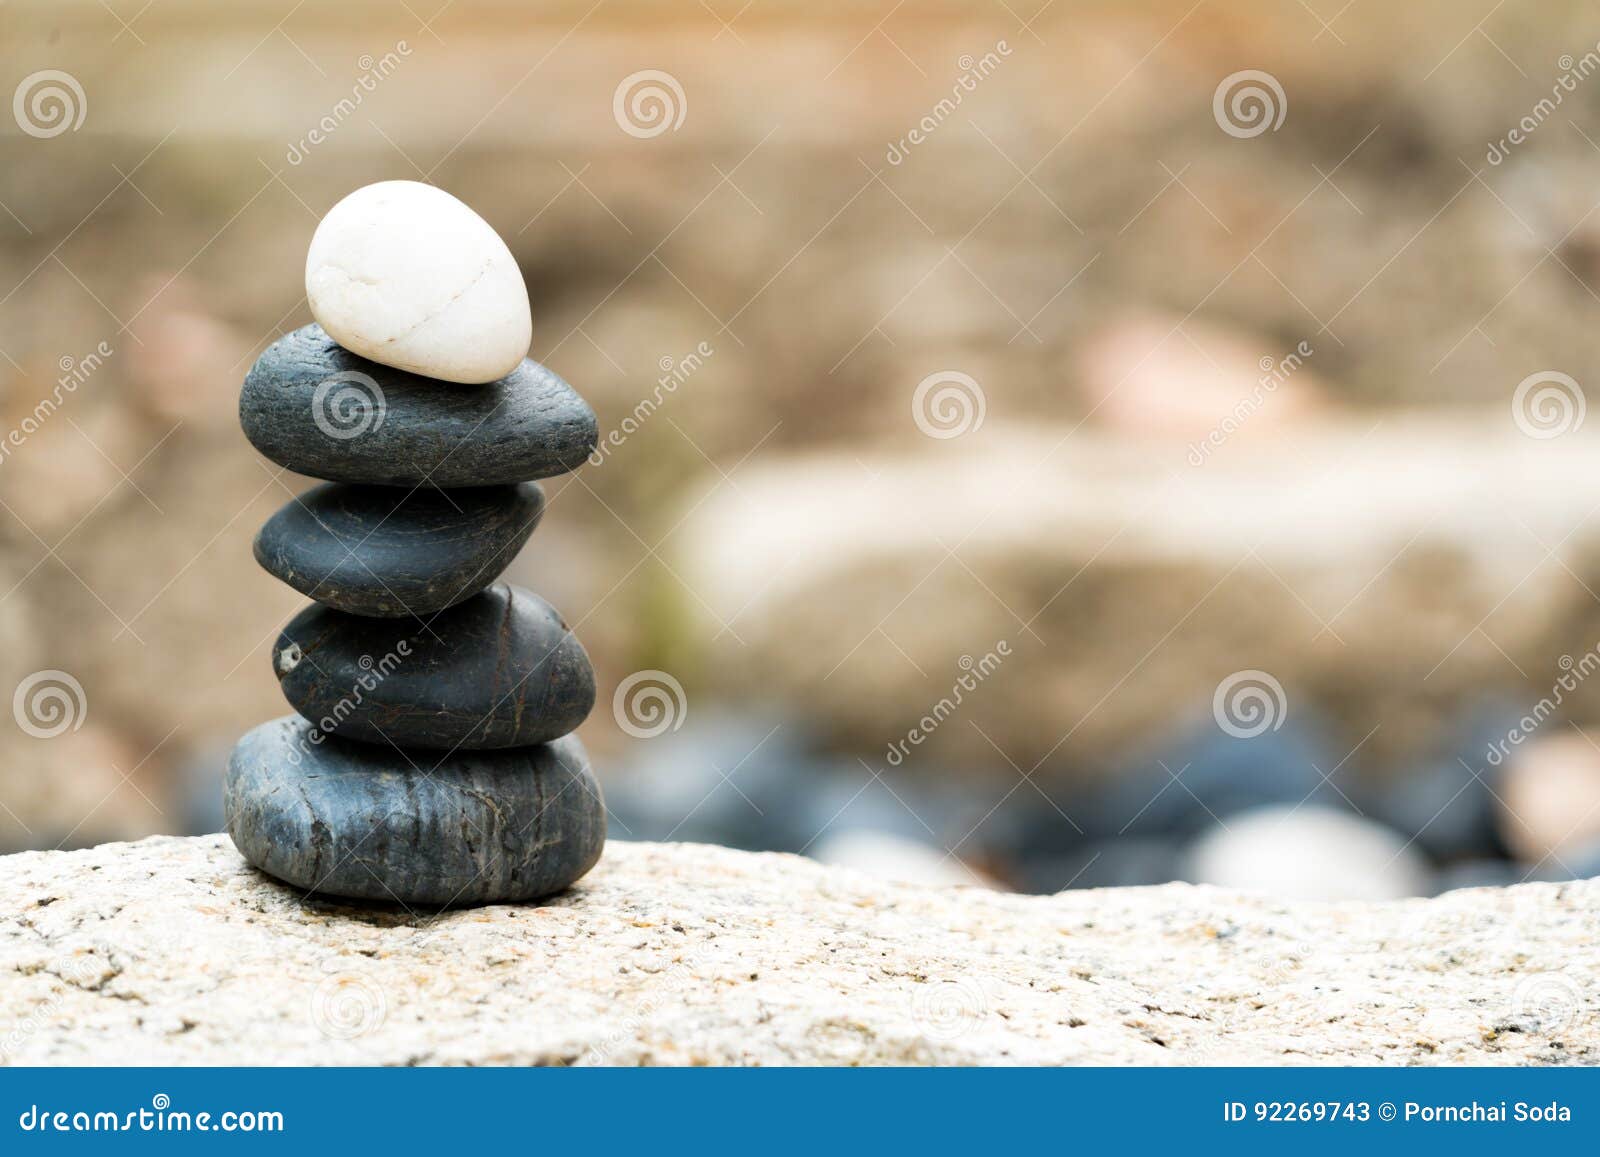 balance stone stack, the difference always outstanding and put on top, stone, balance, rock, peaceful concept